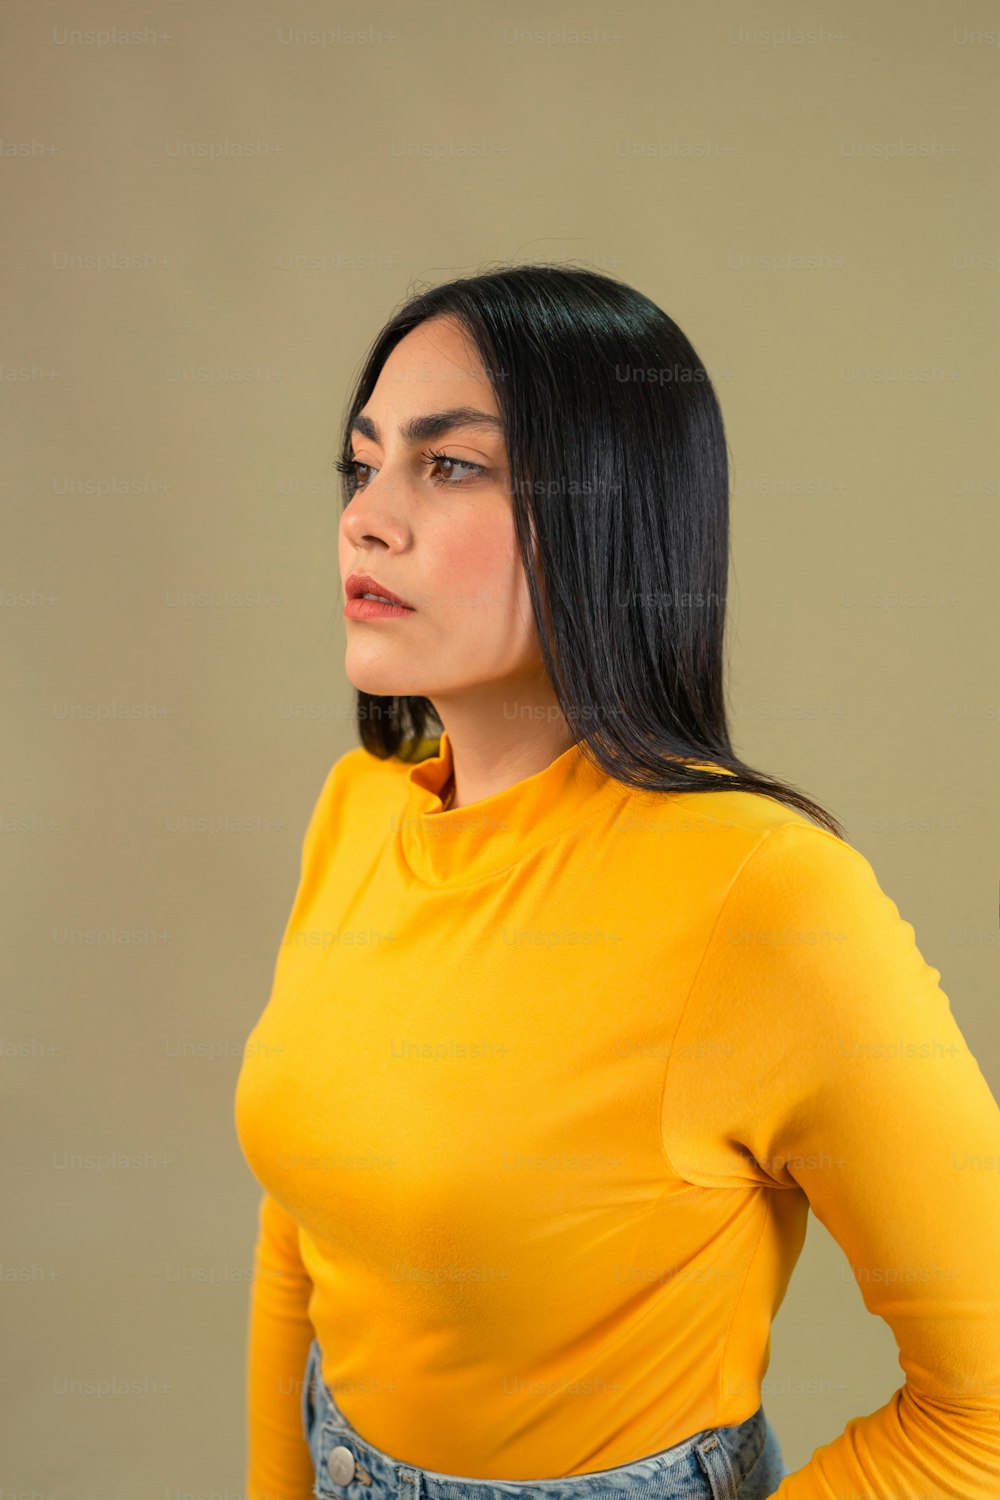 a woman in a yellow shirt is posing for a picture